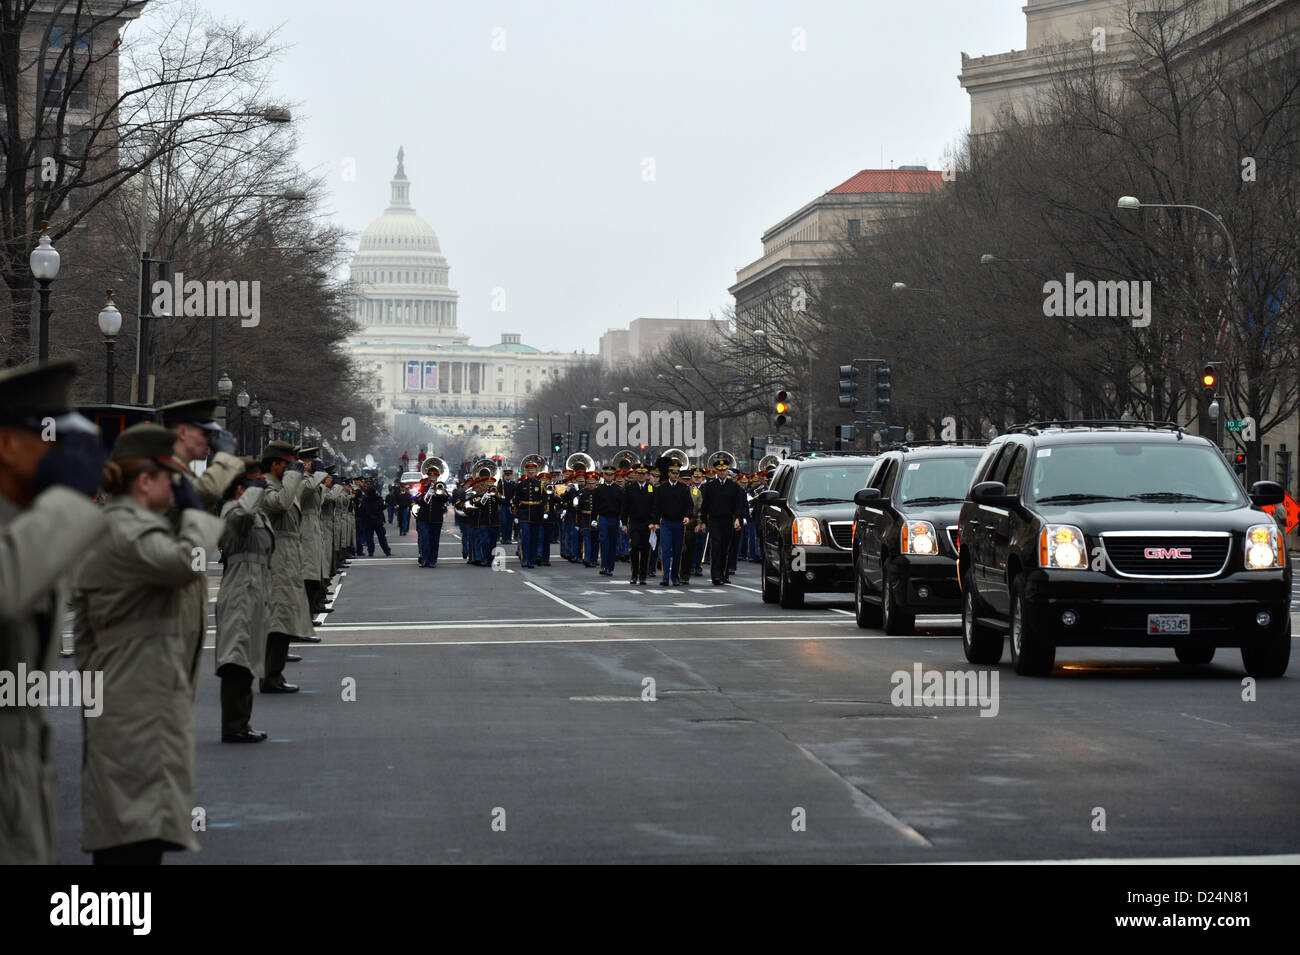 The Marine Corps street cordon salutes as vehicles representing the official party transit along Pennsylvania Avenue during the dress rehearsal for the presidential inaugural parade in Washington, D.C., Jan. 13, 2013. Military involvement in the presidential inauguration dates back to April 30, 1789, when members of the U.S. Army, local militia units and revolutionary war veterans escorted George Washington to his first inauguration ceremony.(DoD Photo by Cpl. Christina O'Neil) (Released) Stock Photo